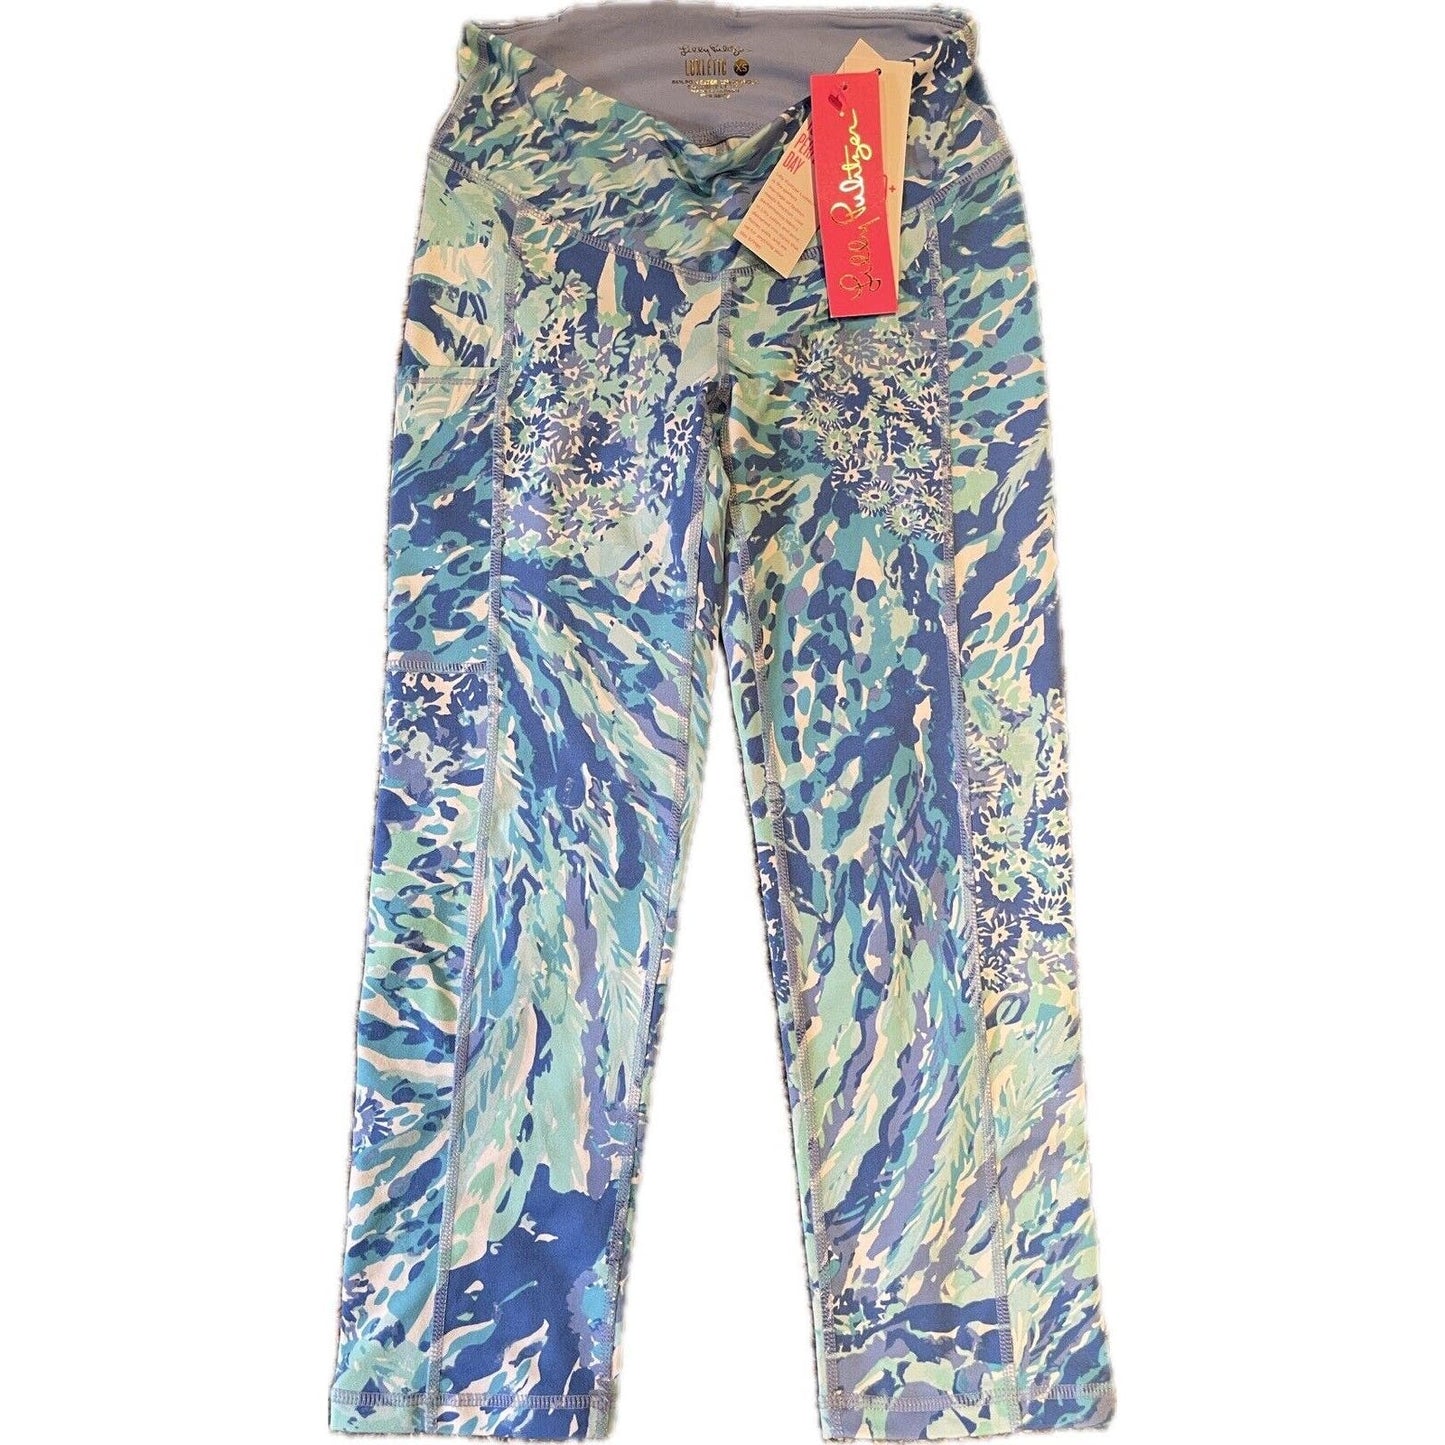 Lilly Pulitzer Luxletic Size XS Weekender Leggings UPF 50+ Brand New NWT